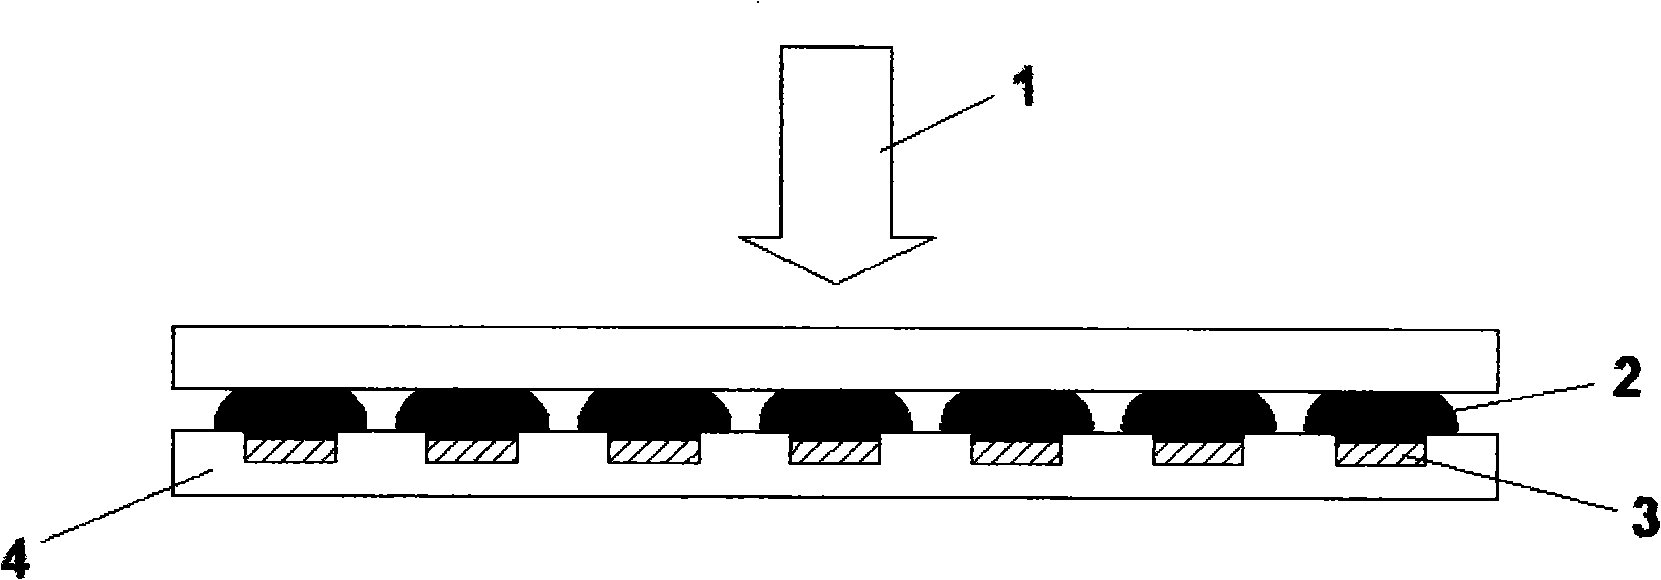 Magnetic fluid lubricating method based on tiny magnetic body array